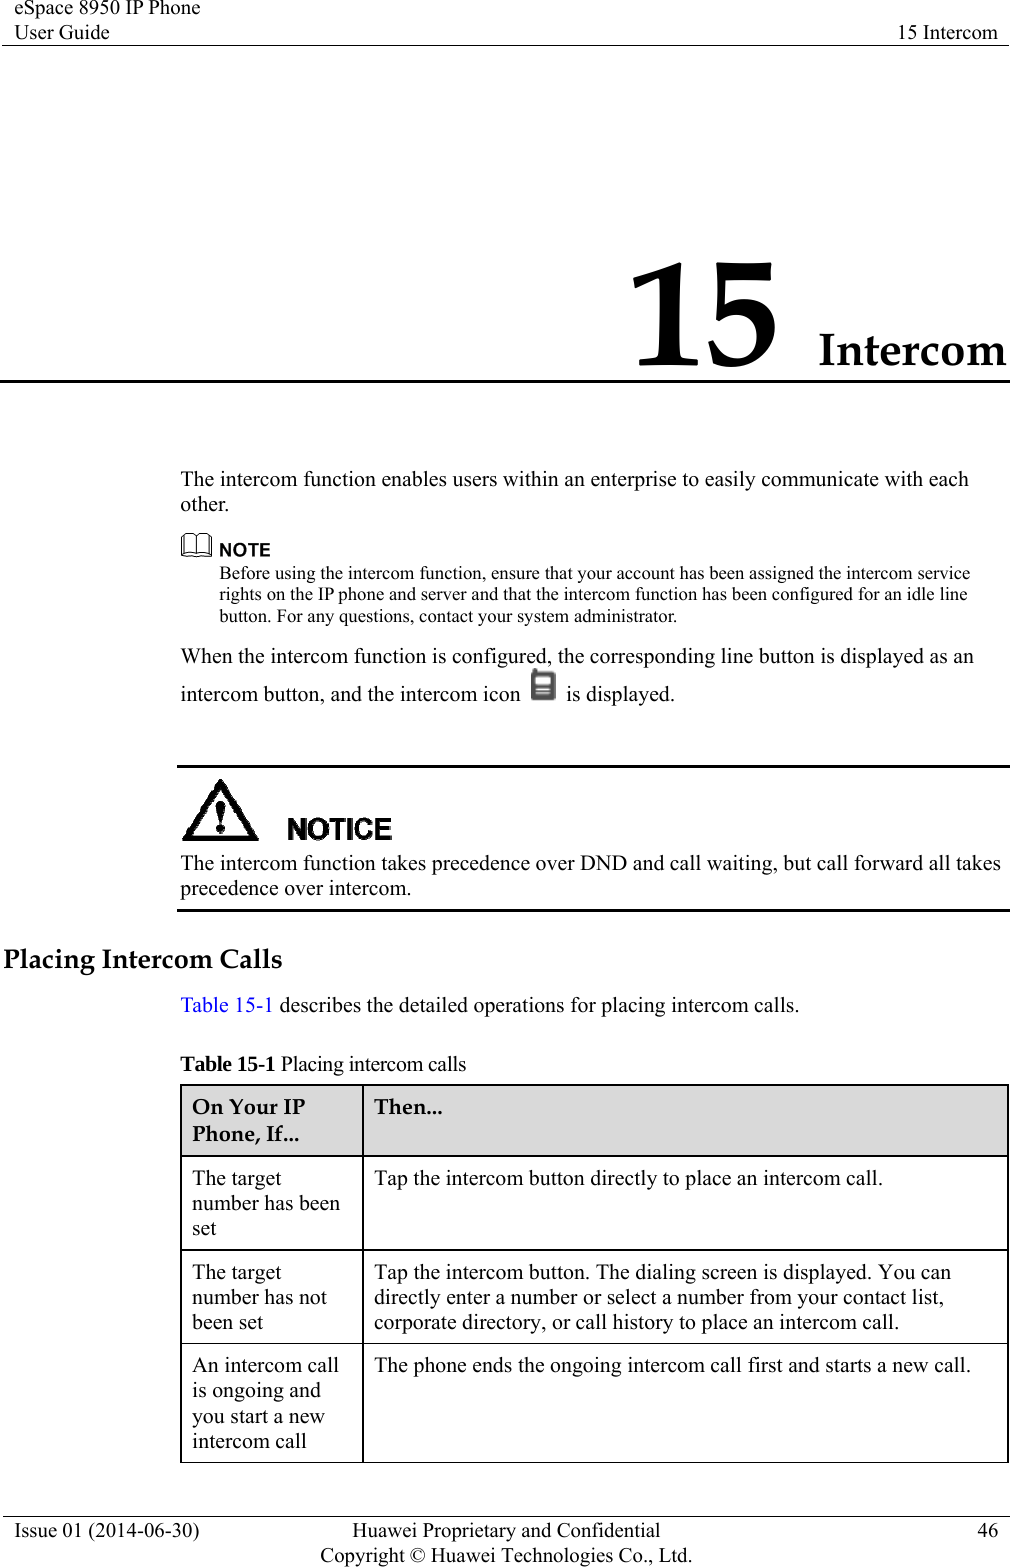 eSpace 8950 IP Phone User Guide  15 Intercom Issue 01 (2014-06-30)  Huawei Proprietary and Confidential         Copyright © Huawei Technologies Co., Ltd.46 15 Intercom The intercom function enables users within an enterprise to easily communicate with each other.  Before using the intercom function, ensure that your account has been assigned the intercom service rights on the IP phone and server and that the intercom function has been configured for an idle line button. For any questions, contact your system administrator. When the intercom function is configured, the corresponding line button is displayed as an intercom button, and the intercom icon   is displayed.   The intercom function takes precedence over DND and call waiting, but call forward all takes precedence over intercom. Placing Intercom Calls Table 15-1 describes the detailed operations for placing intercom calls. Table 15-1 Placing intercom calls On Your IP Phone, If... Then... The target number has been set Tap the intercom button directly to place an intercom call. The target number has not been set Tap the intercom button. The dialing screen is displayed. You can directly enter a number or select a number from your contact list, corporate directory, or call history to place an intercom call. An intercom call is ongoing and you start a new intercom call The phone ends the ongoing intercom call first and starts a new call. 